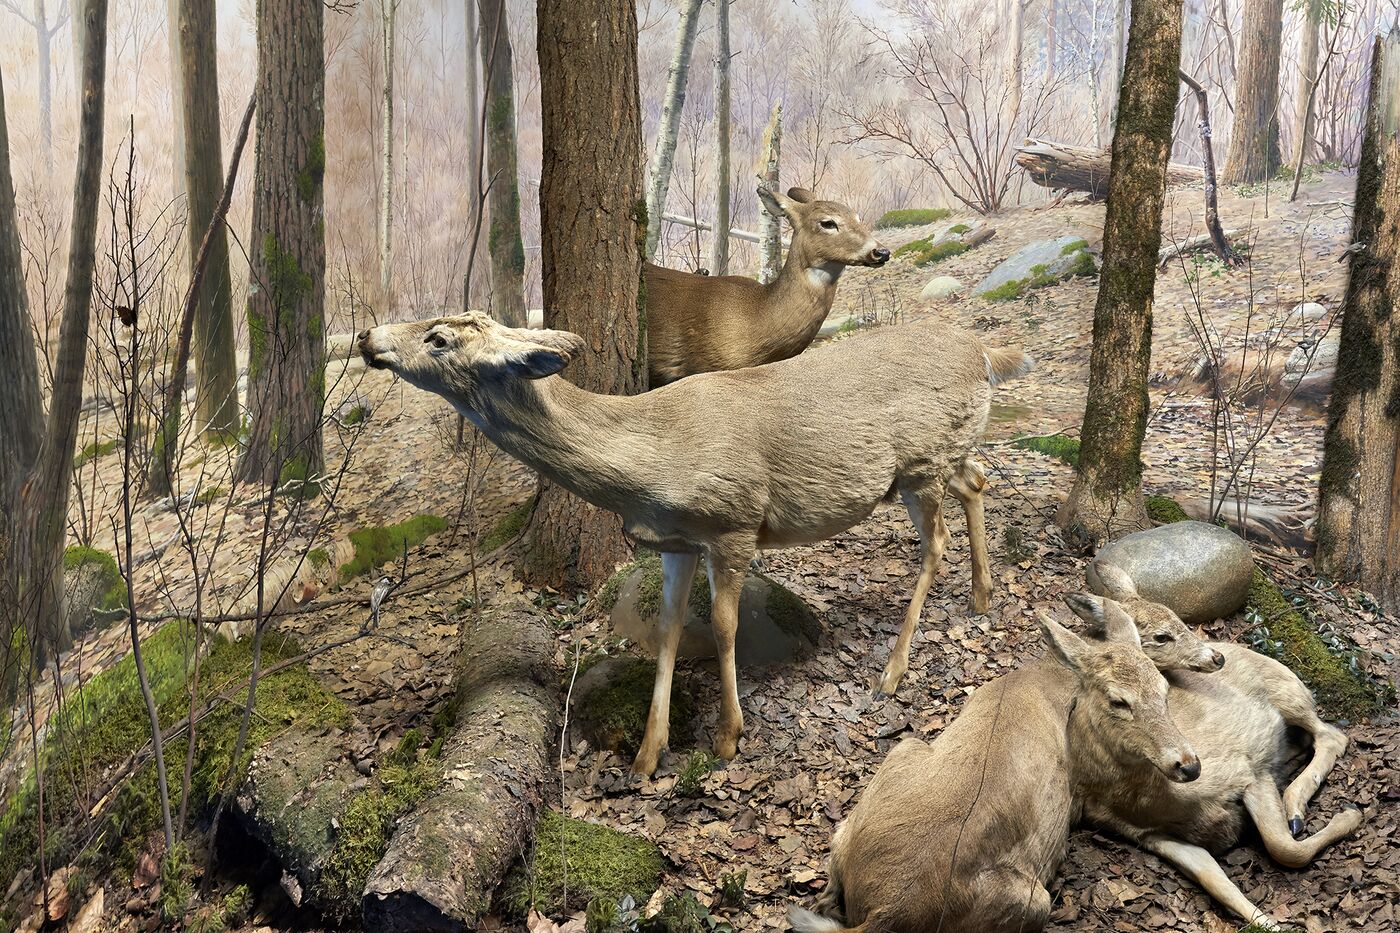 Spring White-Tailed deer from Carl Akeley's Four Seasons of the Deer diorama.